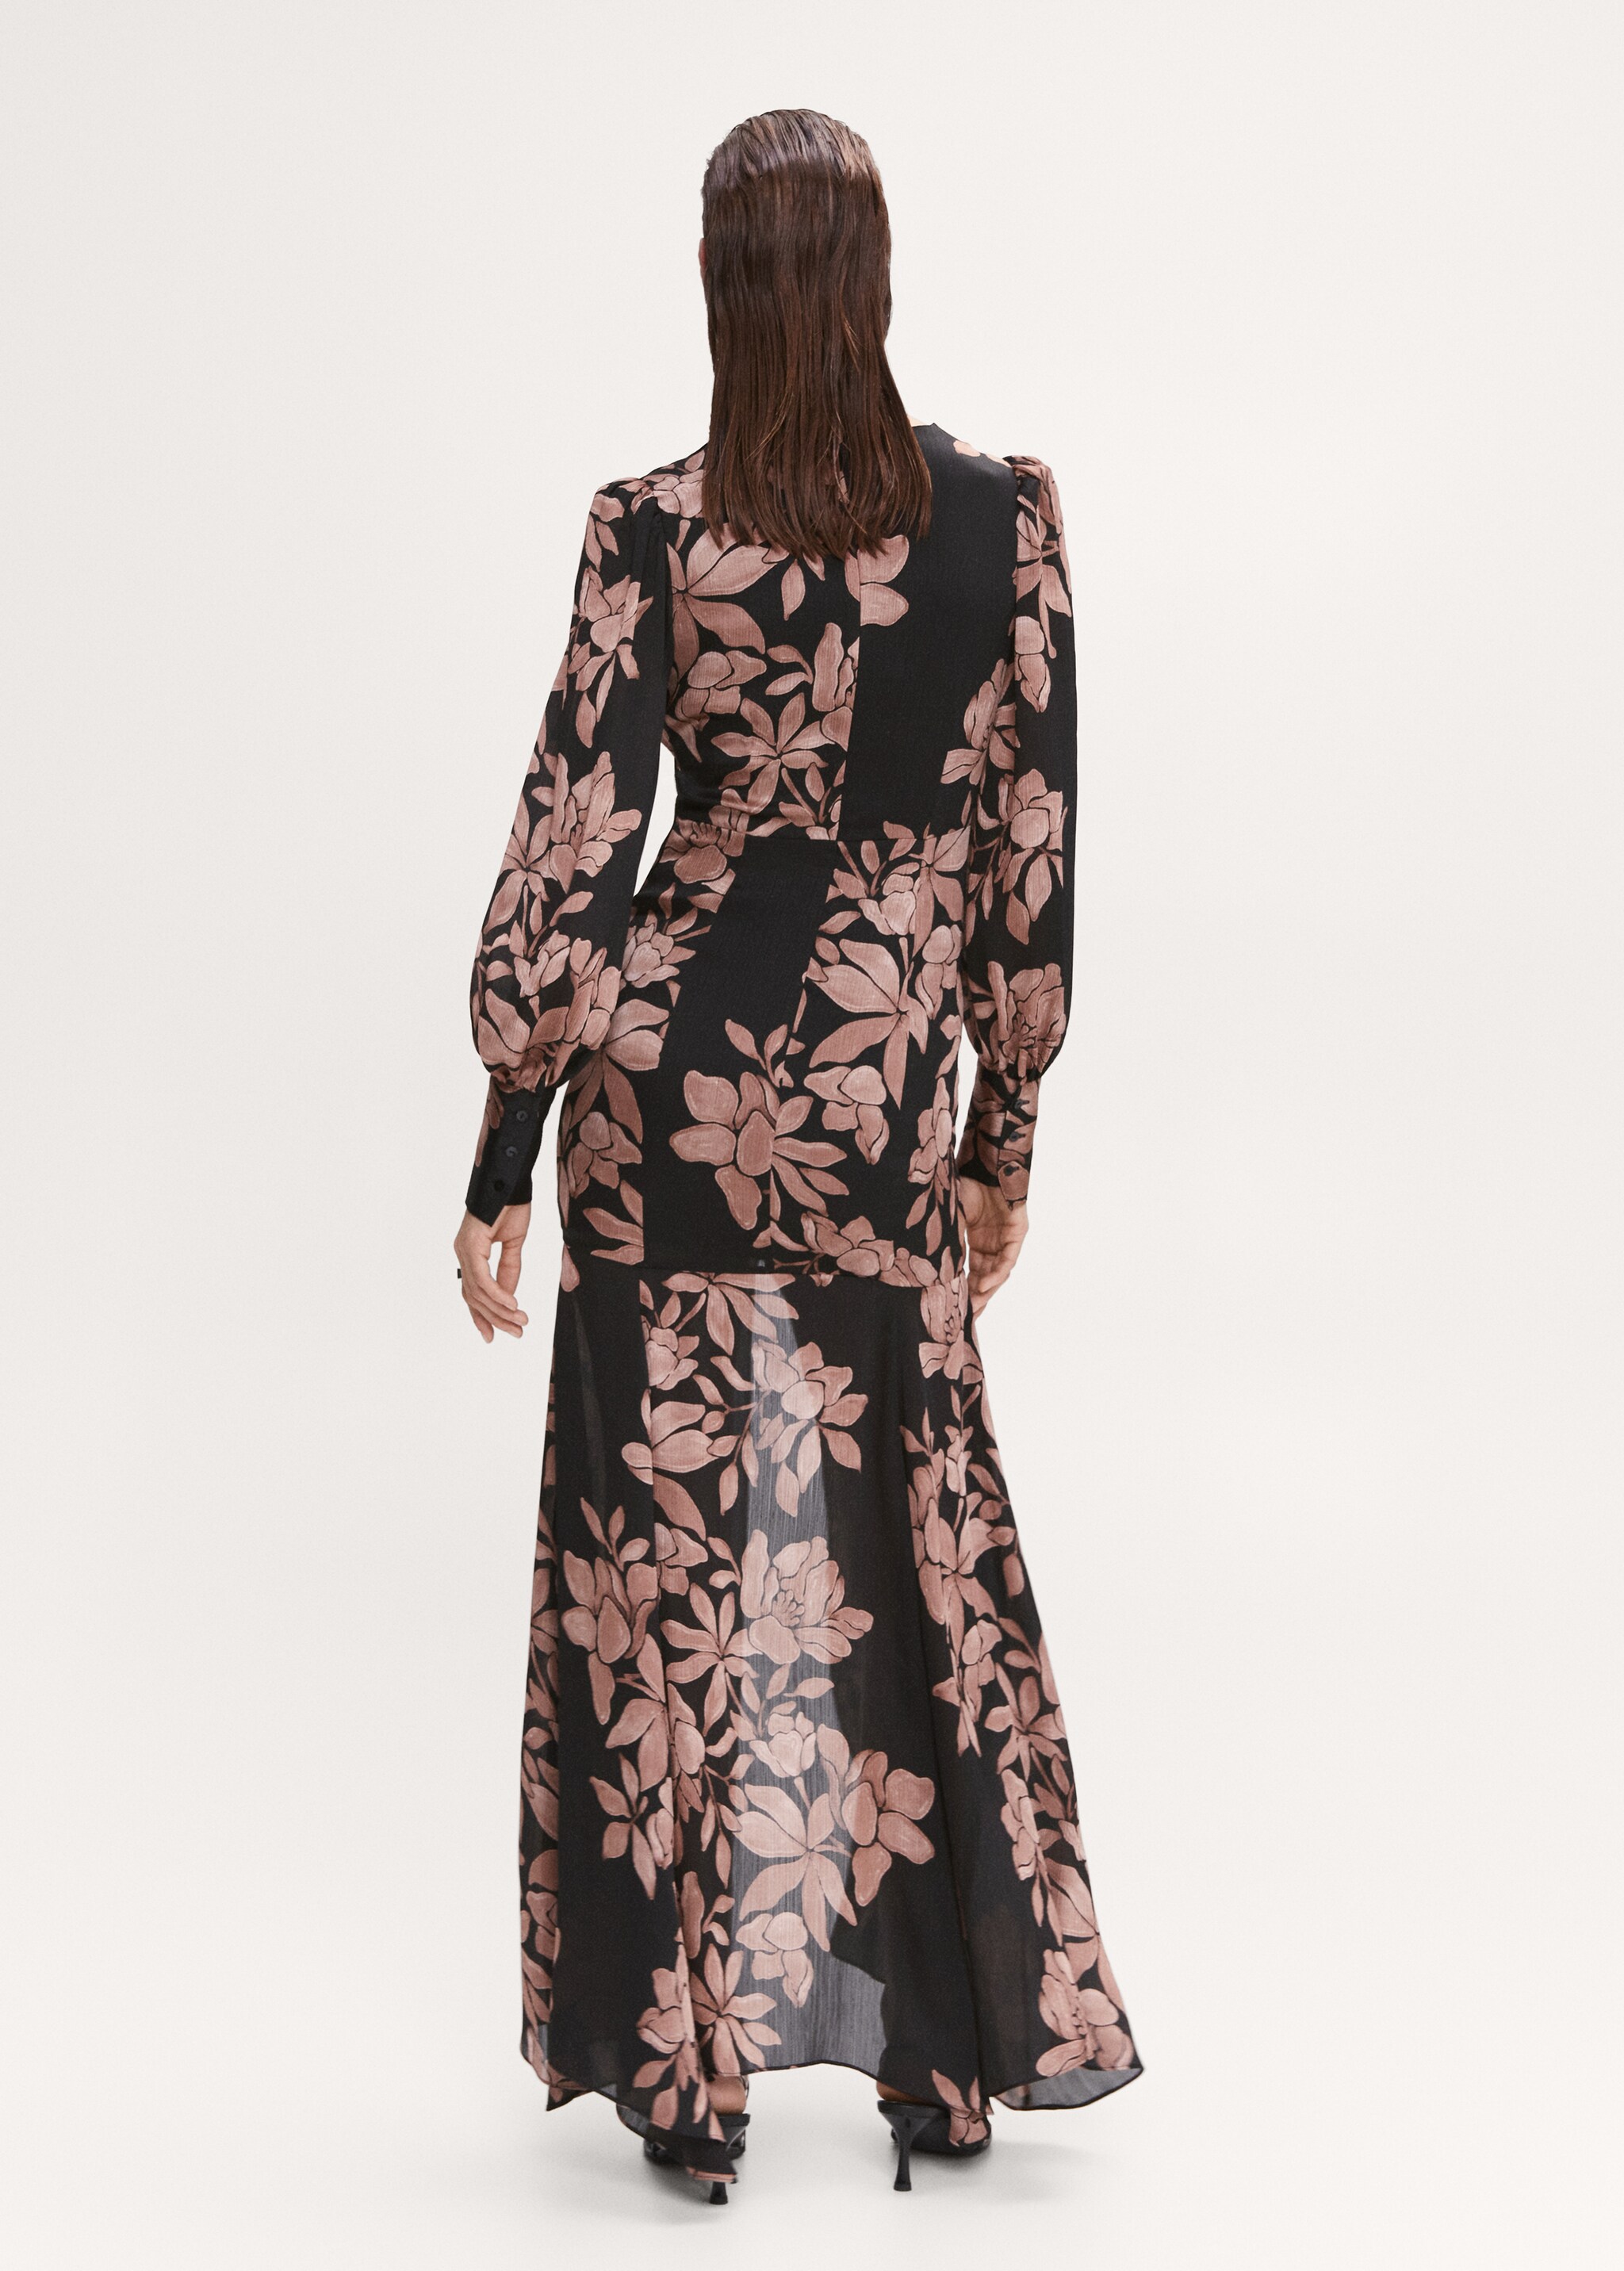 Floral chiffon dress - Reverse of the article